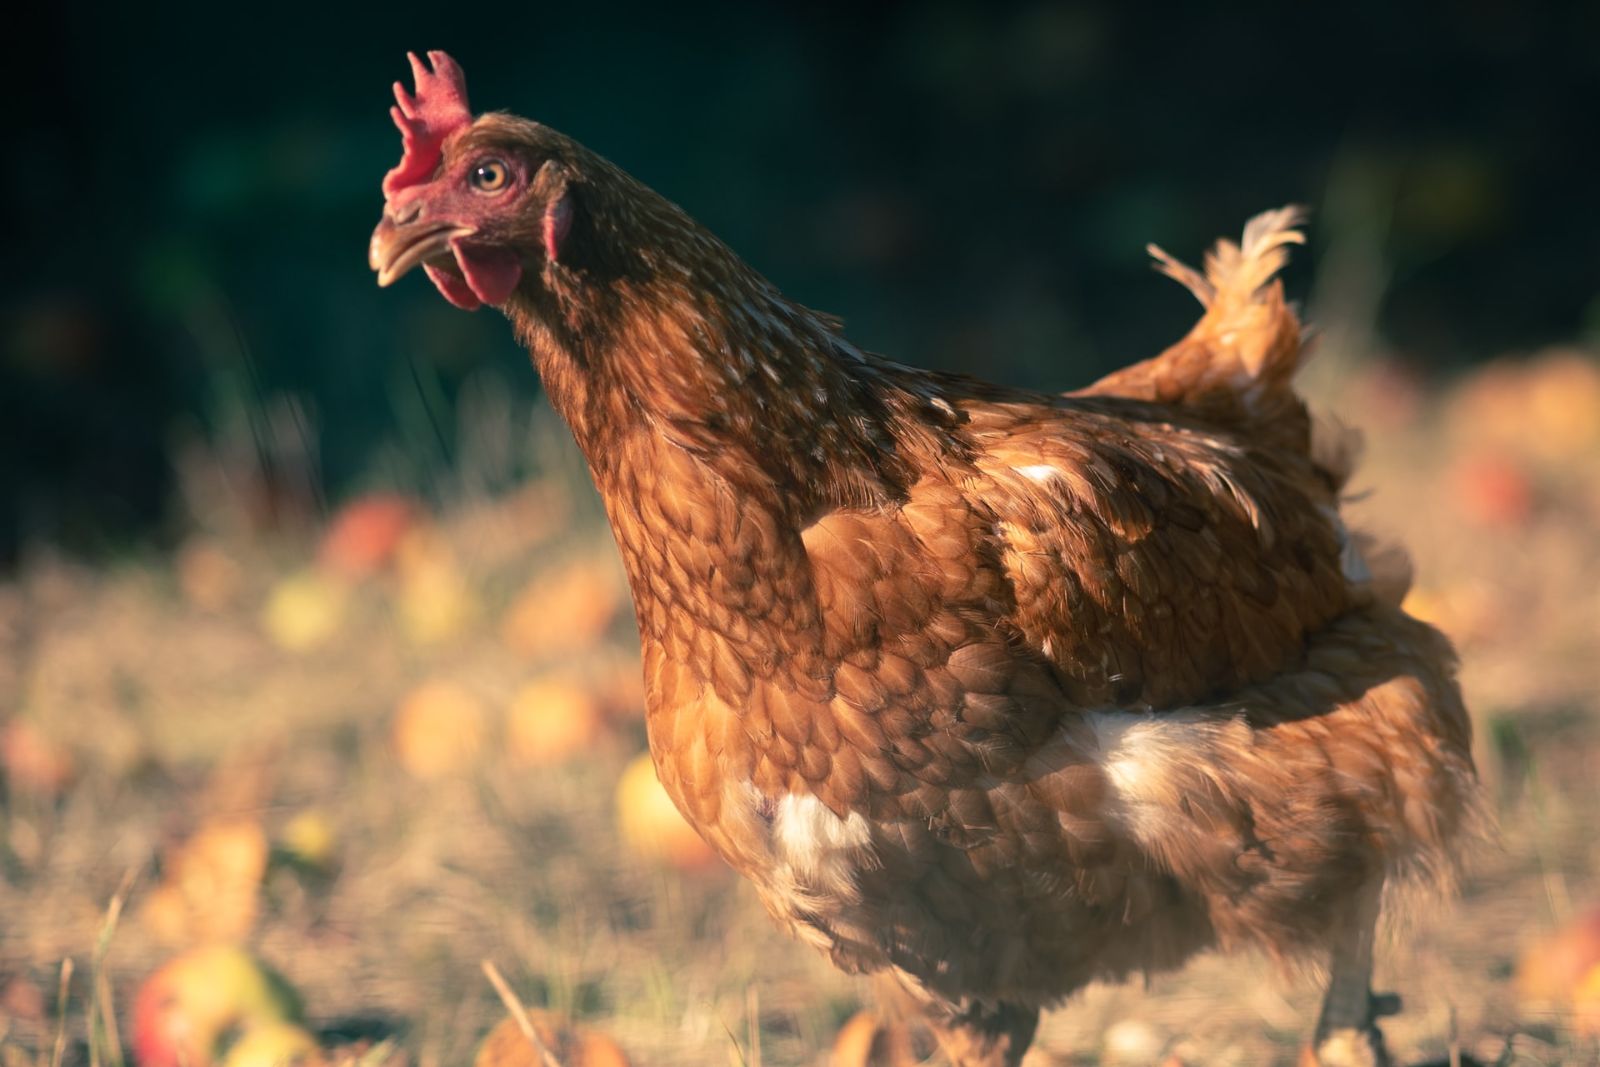 Pros and cons of local and heritage chicken breeds